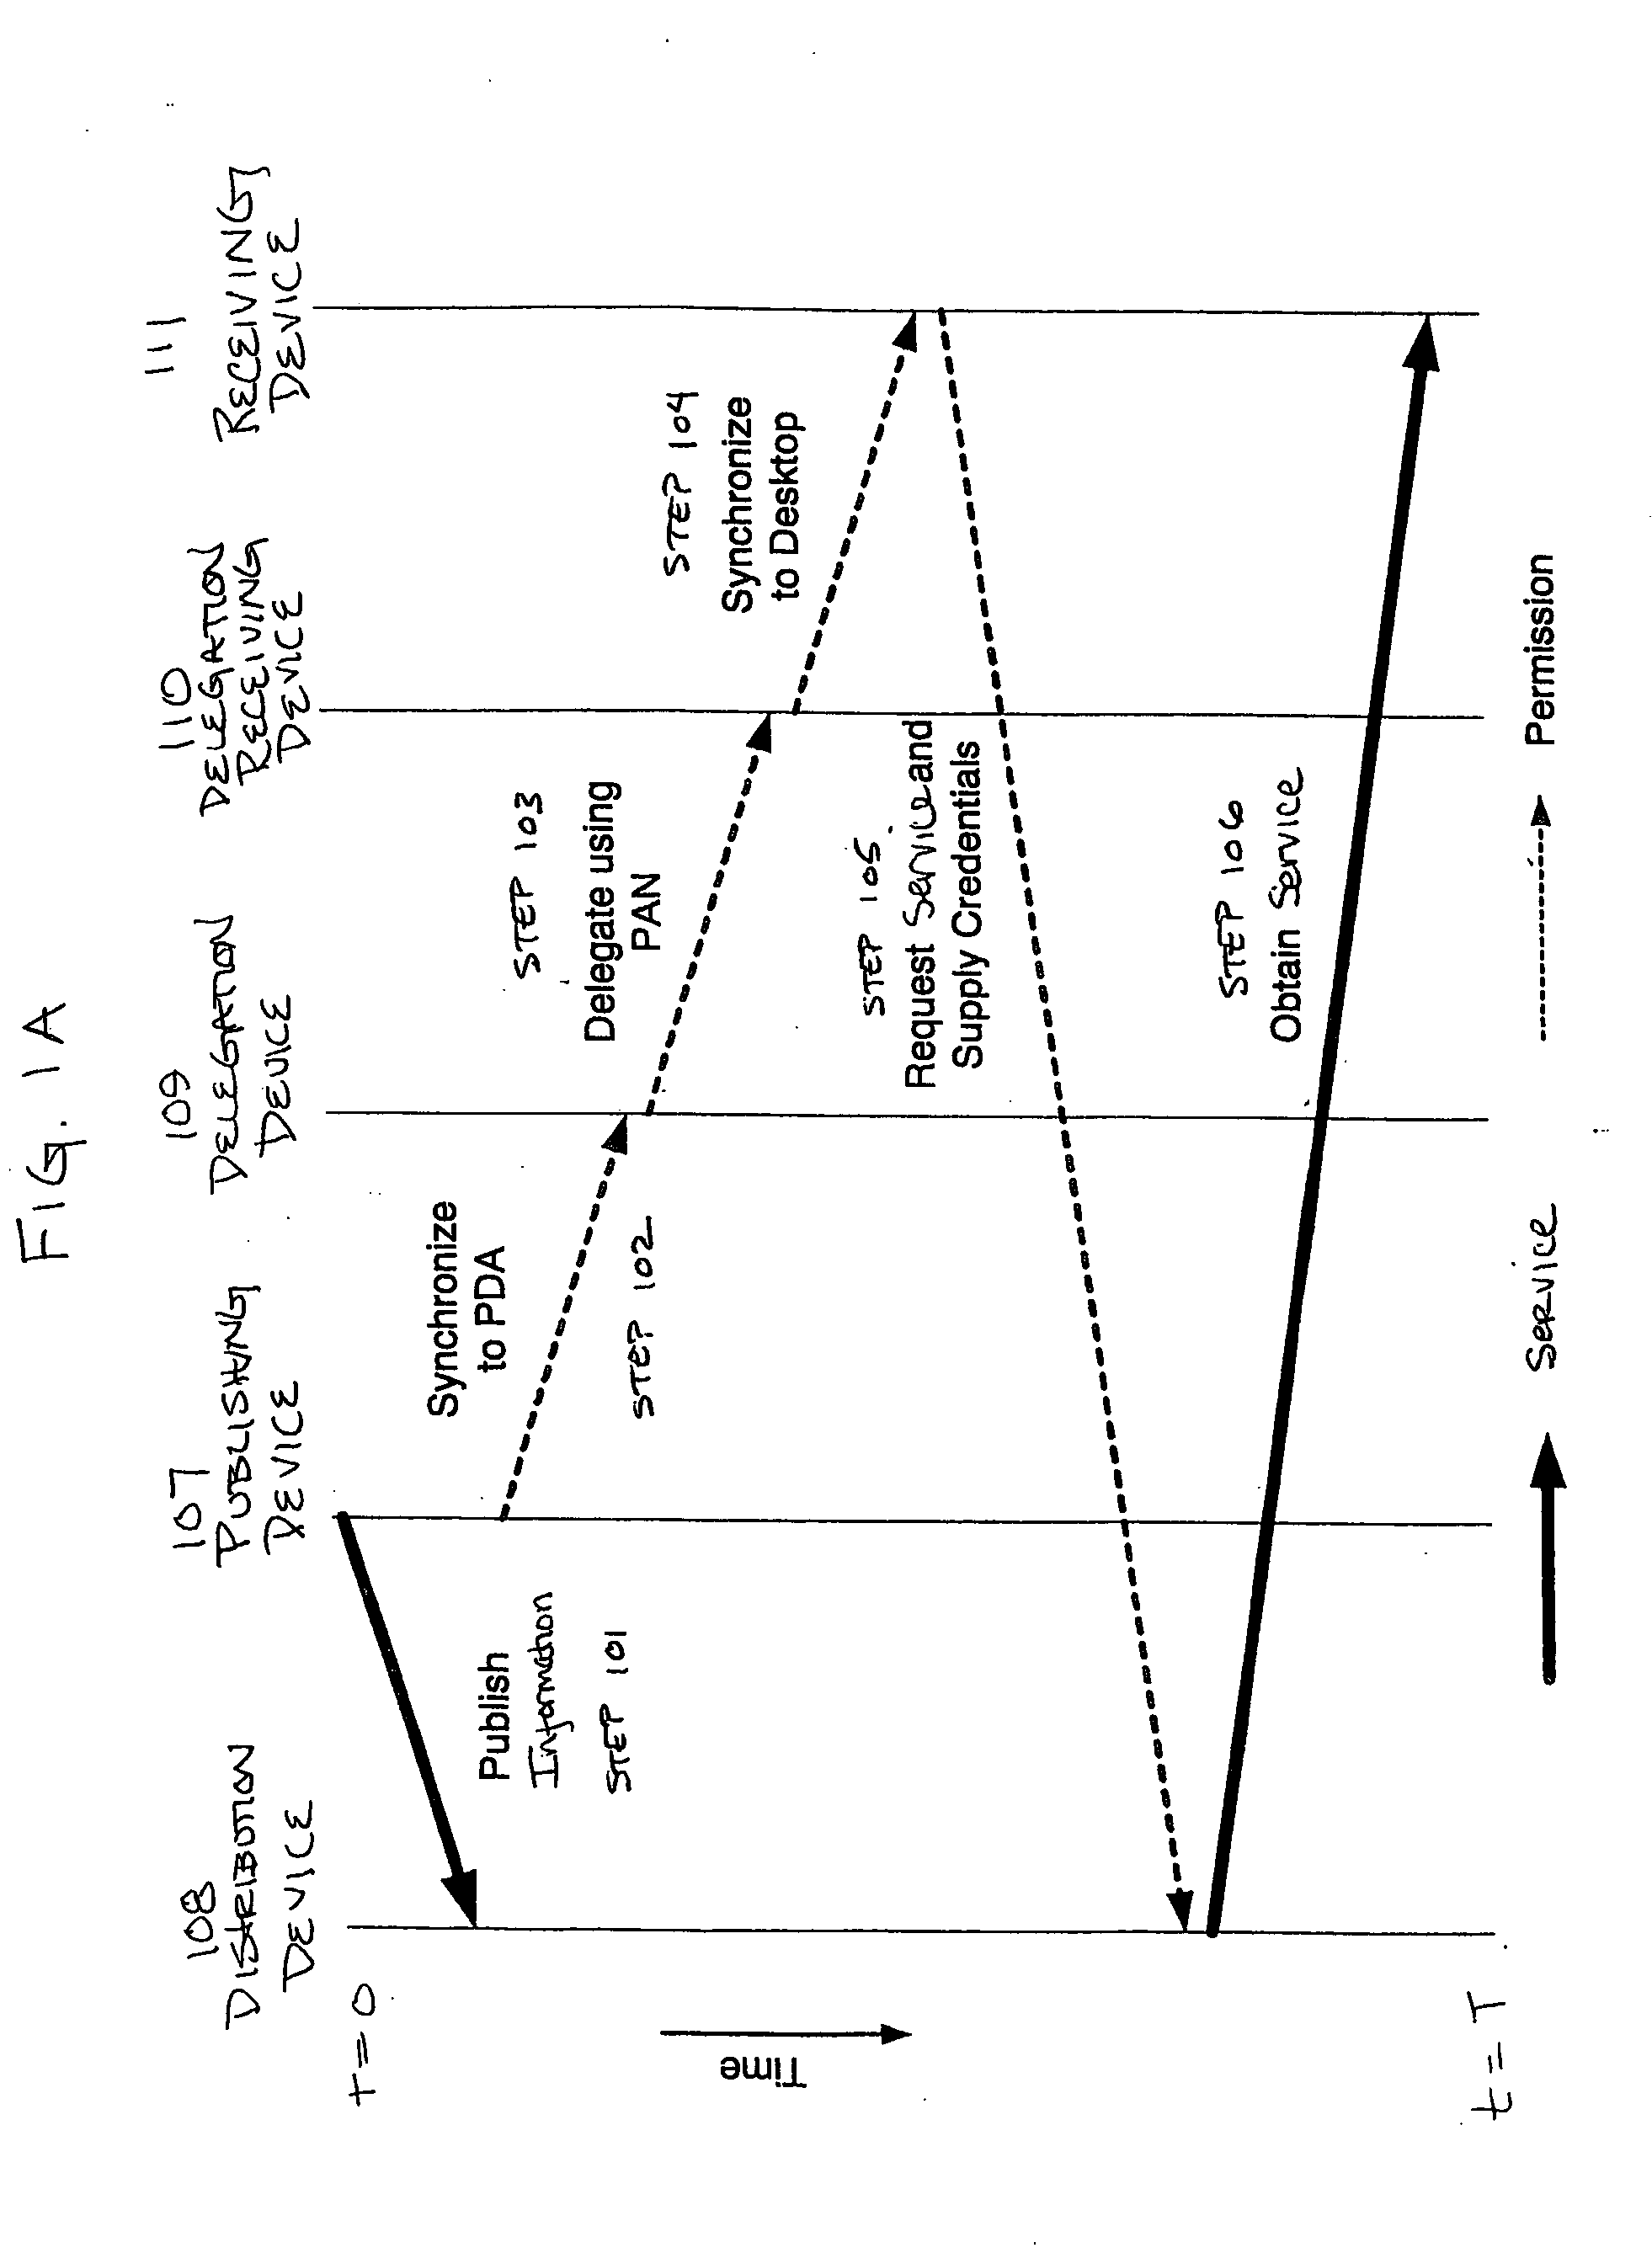 Method for automatically generating list of meeting participants and delegating permission